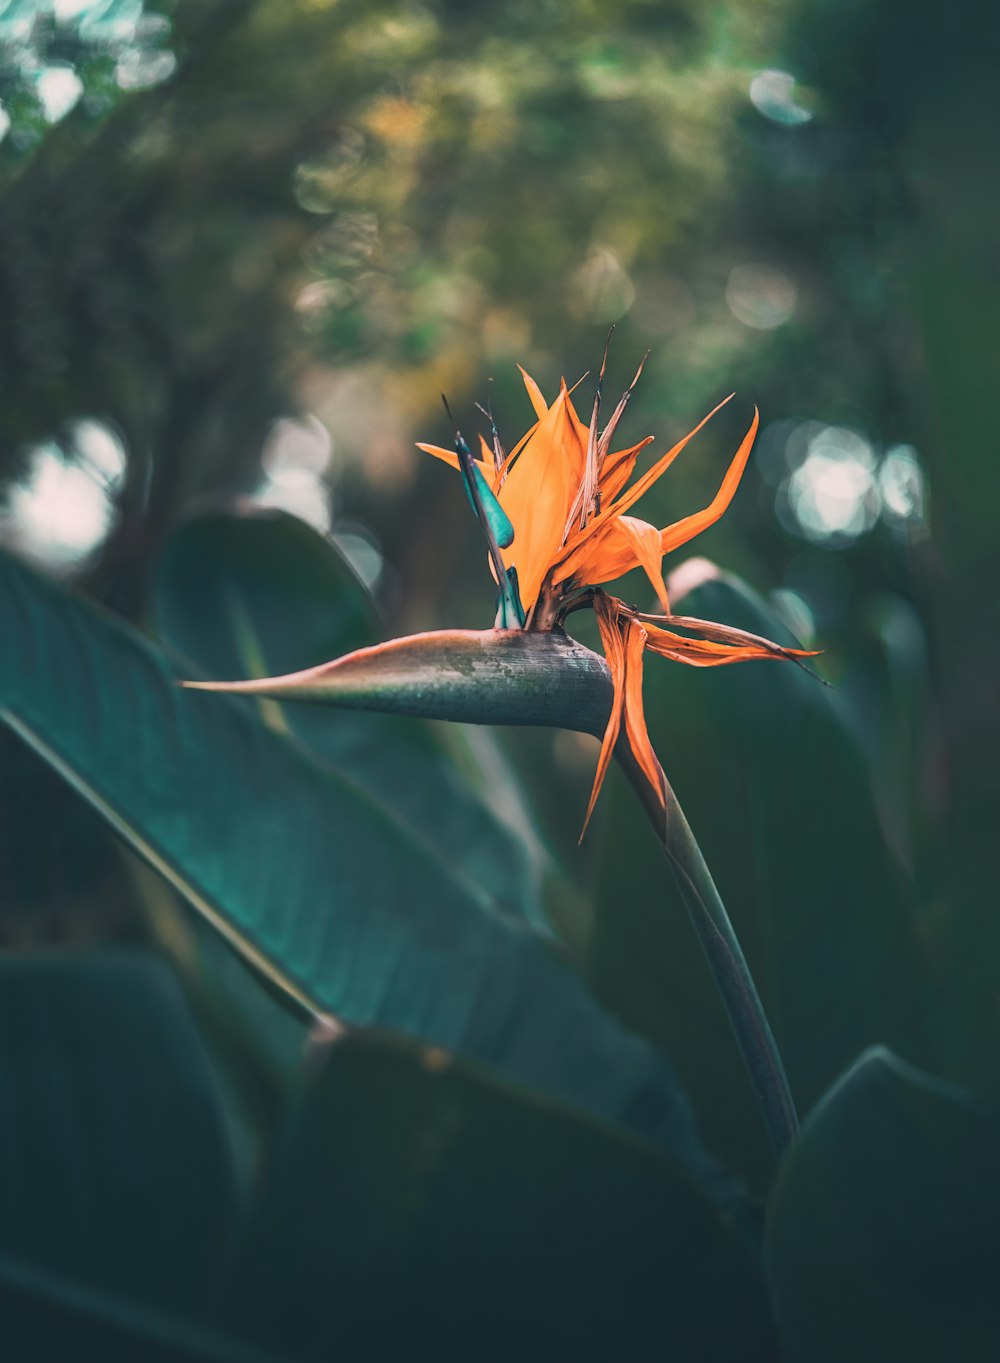 a bird of paradise flower in a tropical setting